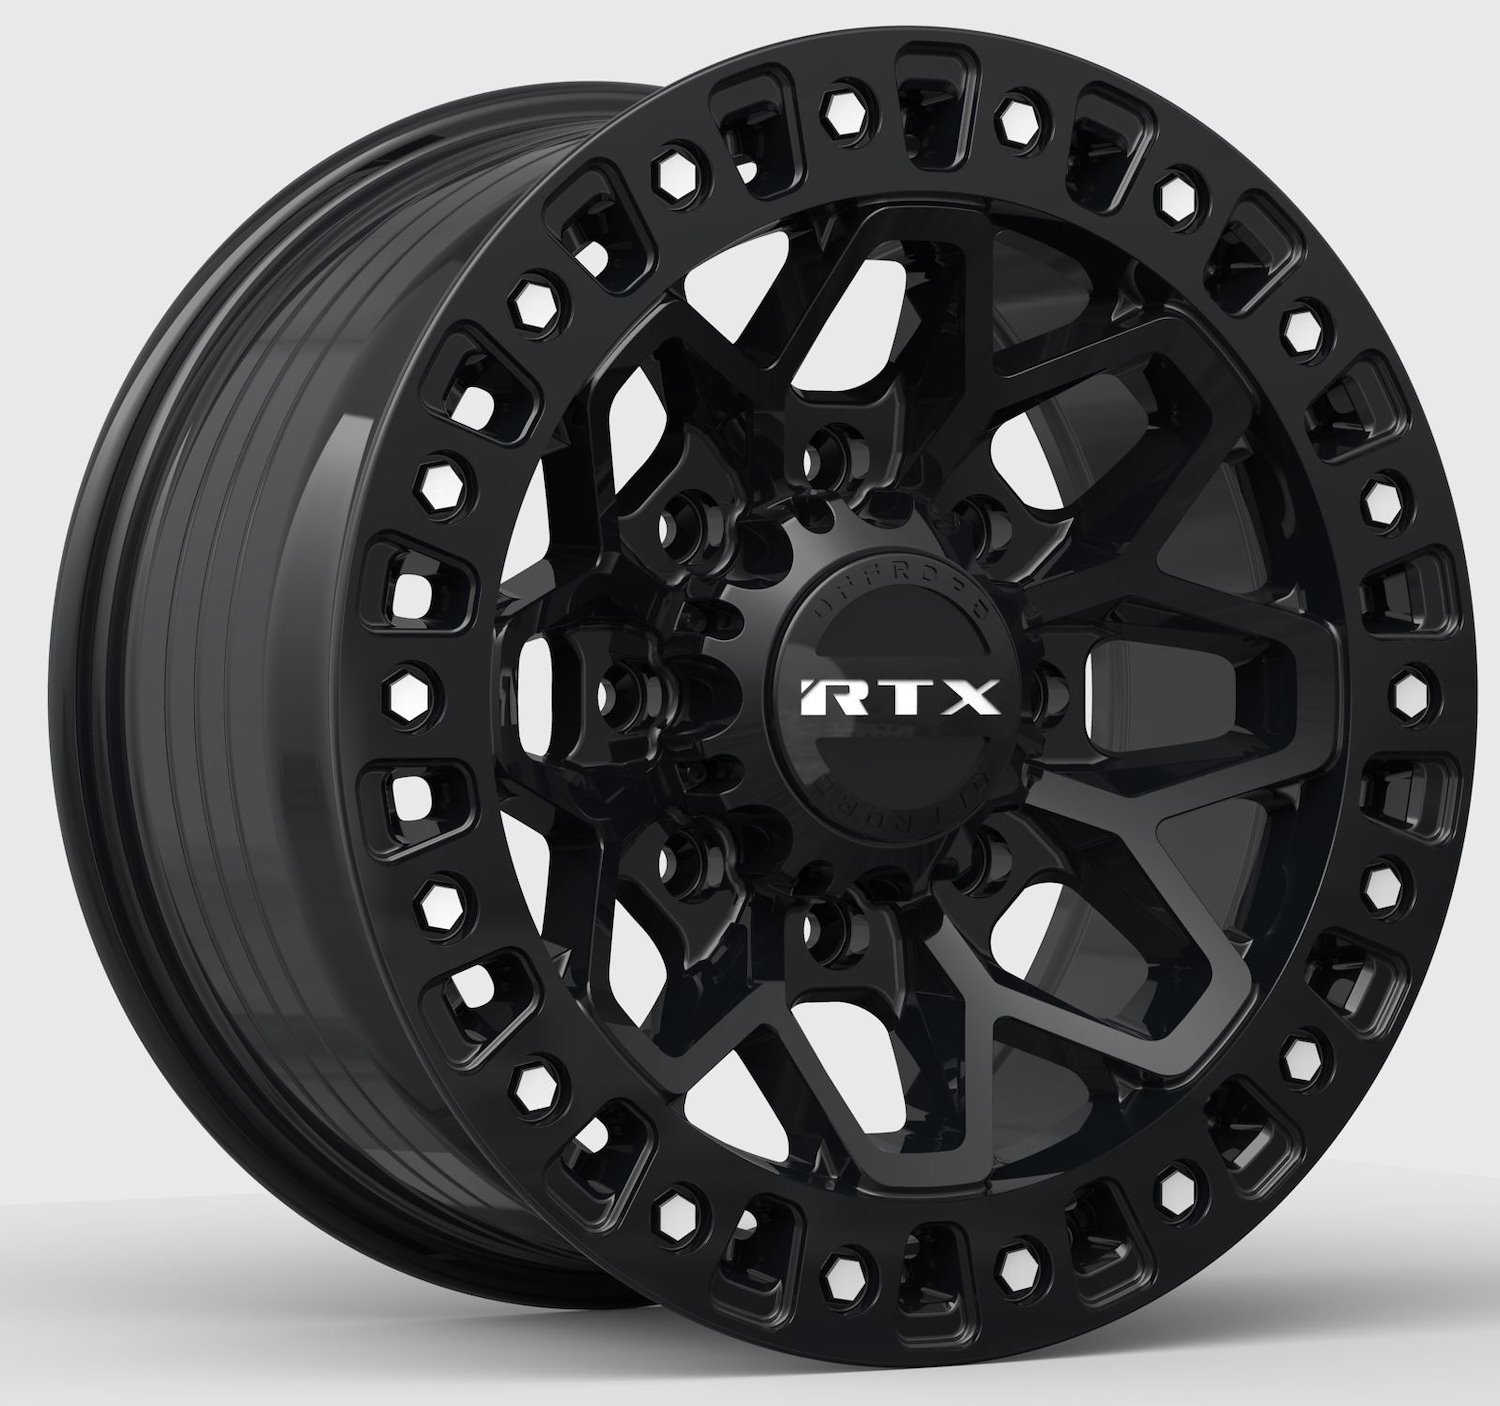 083190 Off-Road Series Zion Wheel [Size: 17" x 9"] Gloss Black Milled Rivets Finish